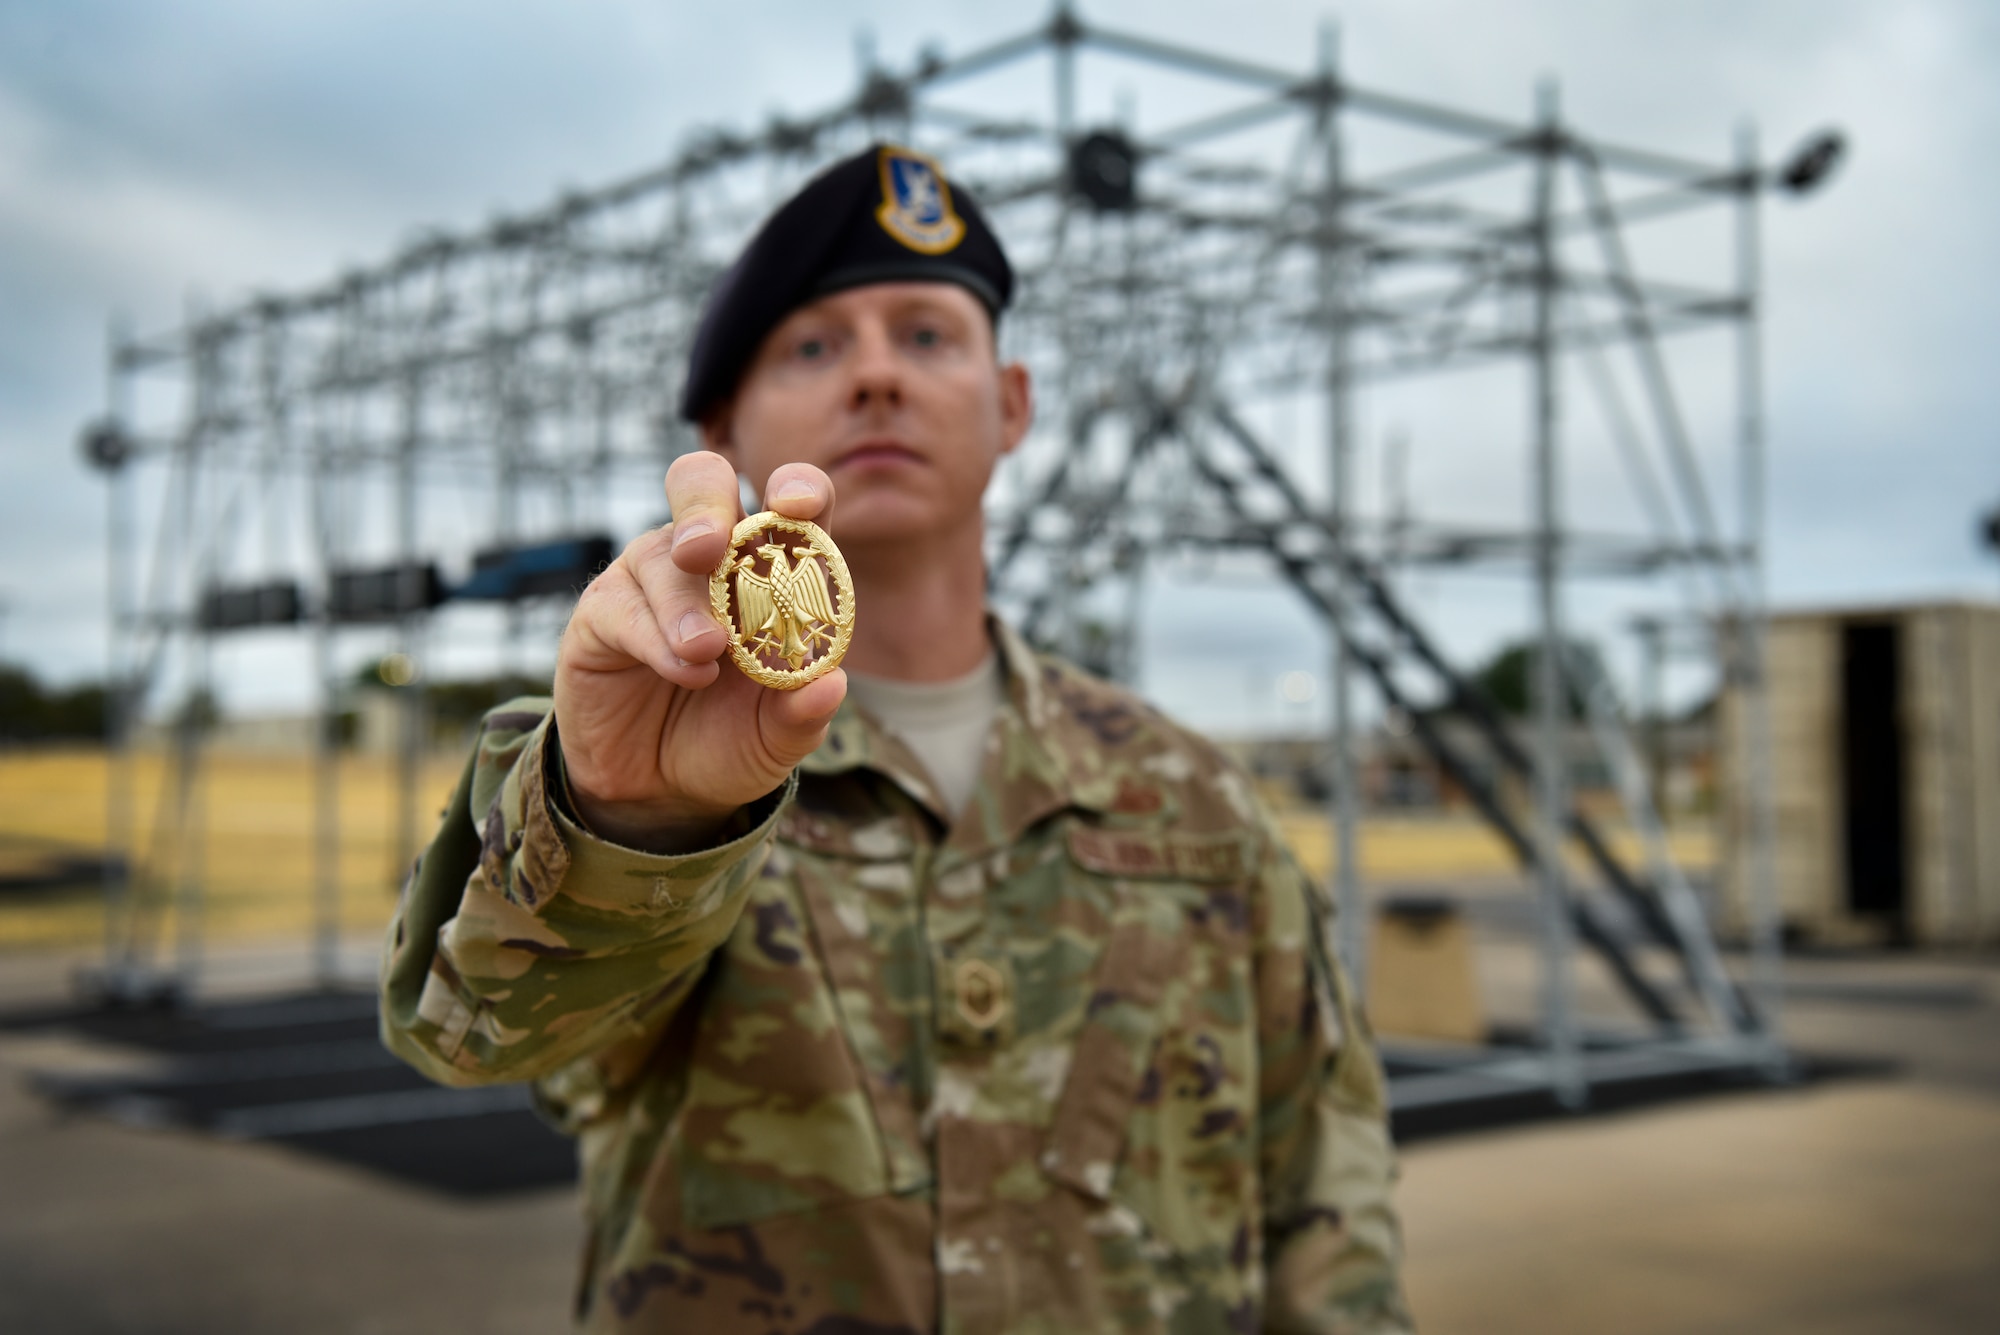 Master Sgt. Christopher Long, 47th Security Forces Squadron logistics and resources superintendent, holds a German Armed Forces Badge for Military Proficiency at Laughlin Air Force Base, Texas, Oct. 10, 2019. “This was a great opportunity for our defenders to broaden their horizon and participate in activities outside their scope and challenge their abilities,” said Long. (U.S. Air Force photo by Senior Airman Marco A. Gomez)